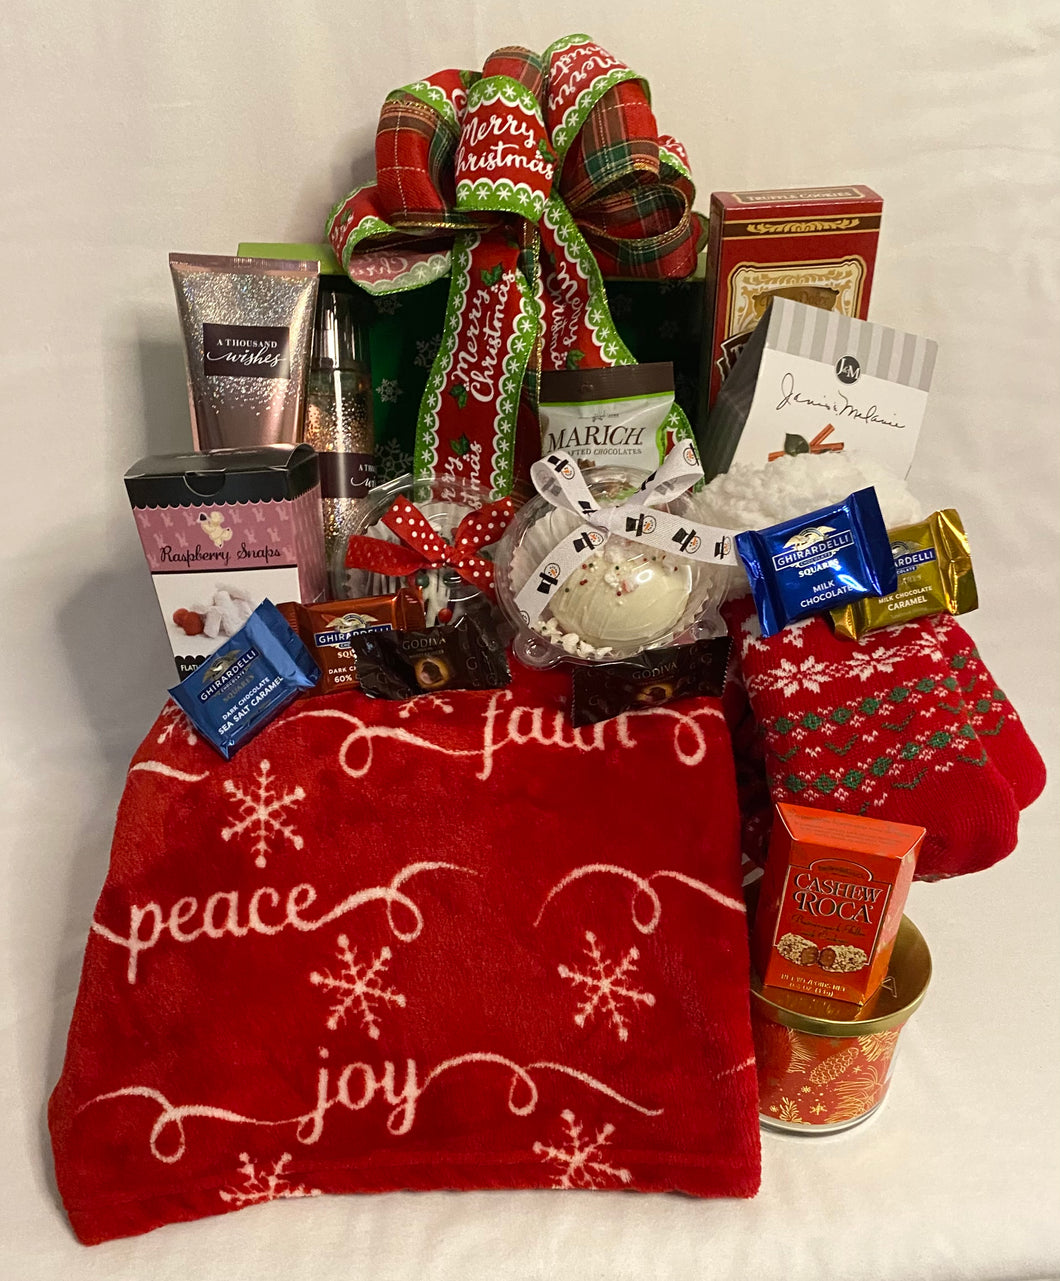 Our Christmas Holiday Trunk is a gift overloaded with special treats for yourself or that special someone! Your gift will be over the top in this beautiful trunk filled with these comforting and cozy treats. The trunk is a perfect gift in itself to store many different things.